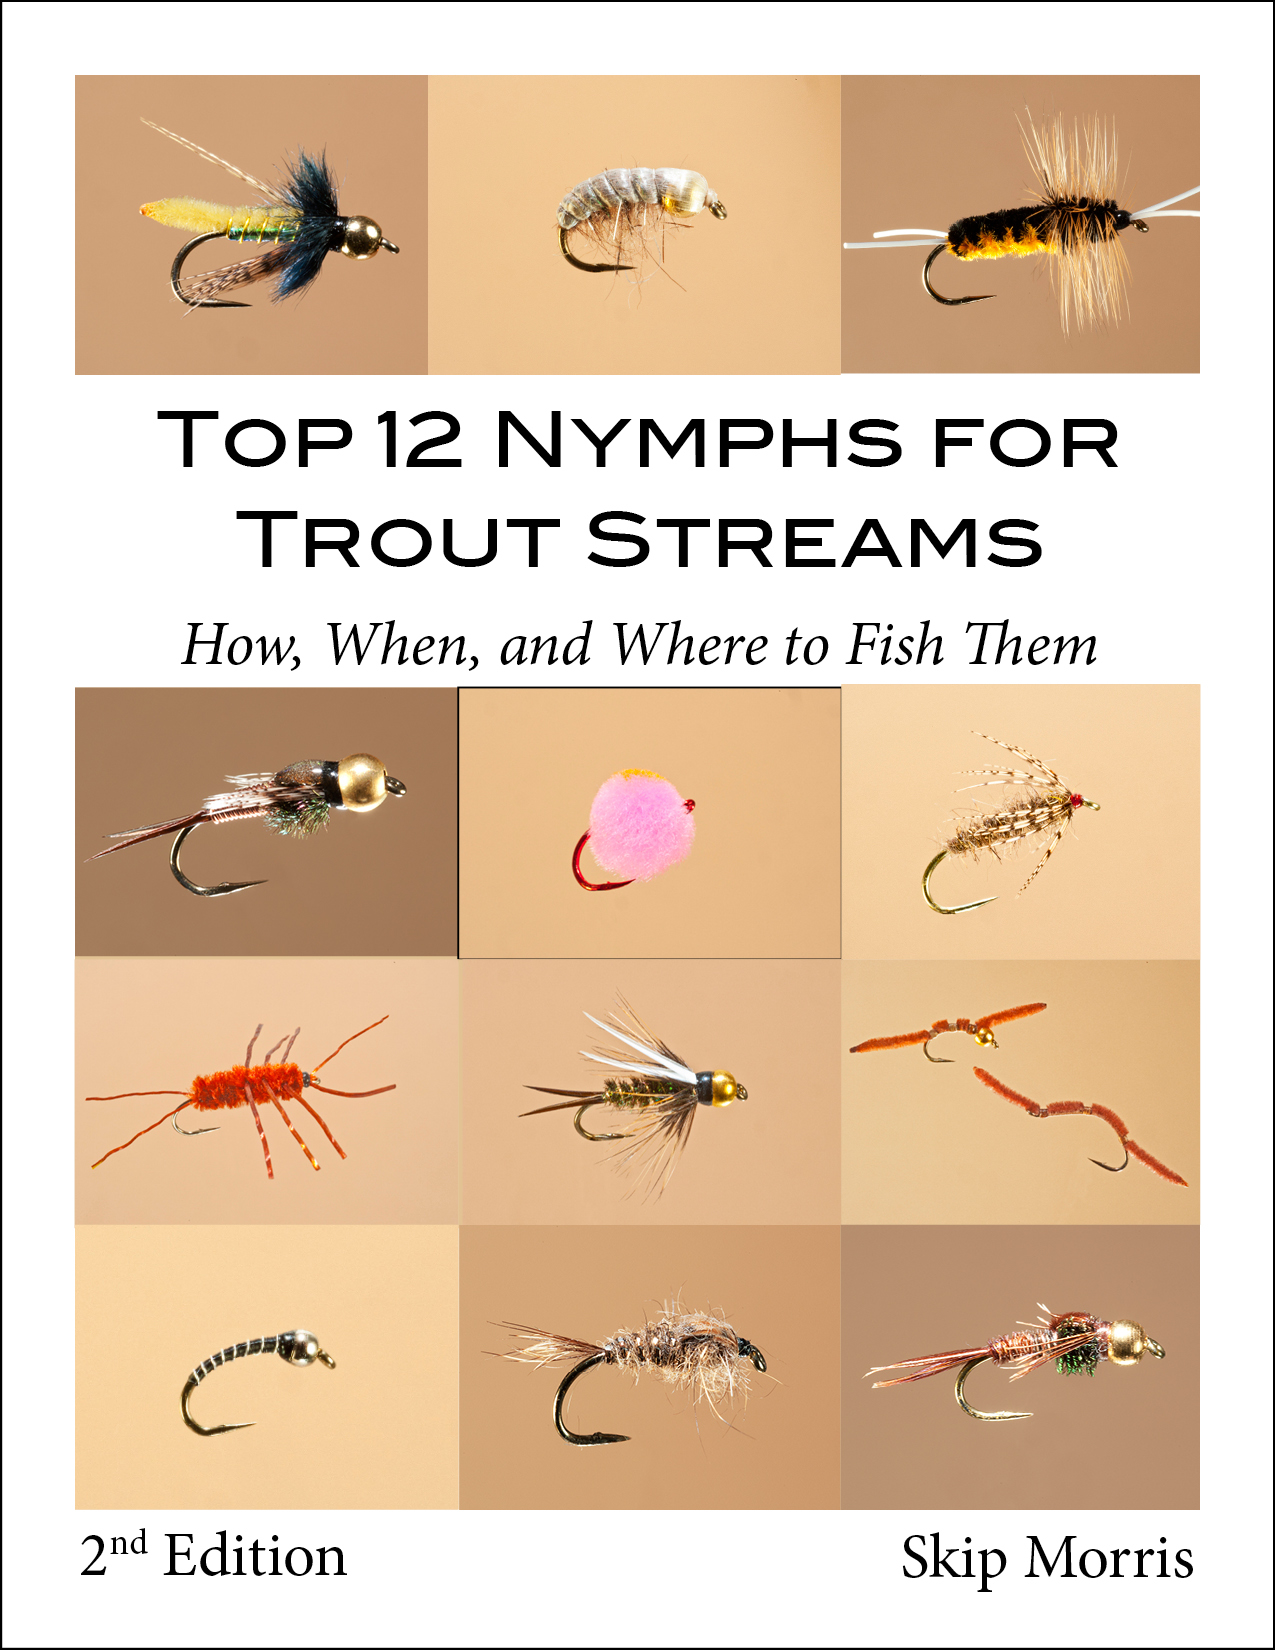 Top 12 Nymphs for Trout Streams: How, When, and Where to Fish Them by Skip Morris